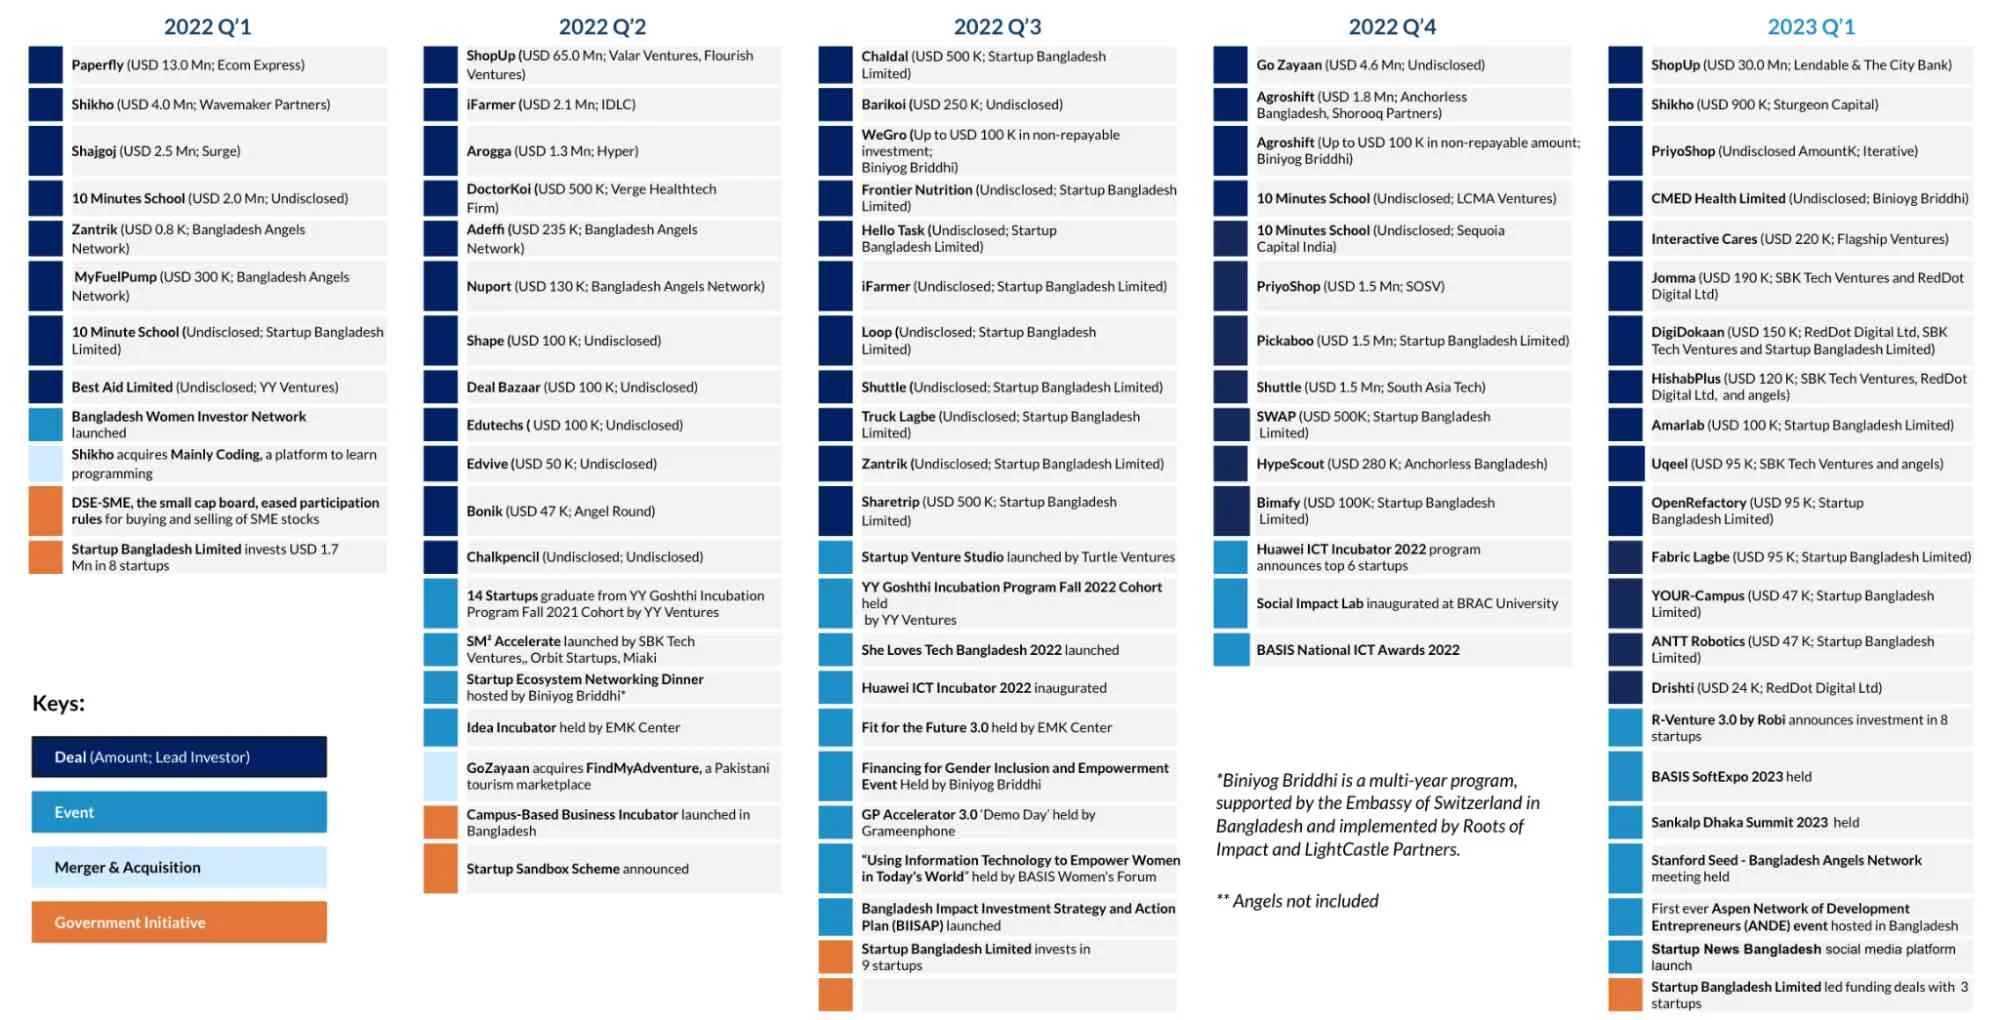 Notable events and their timeline in the Bangladesh startup ecosystem